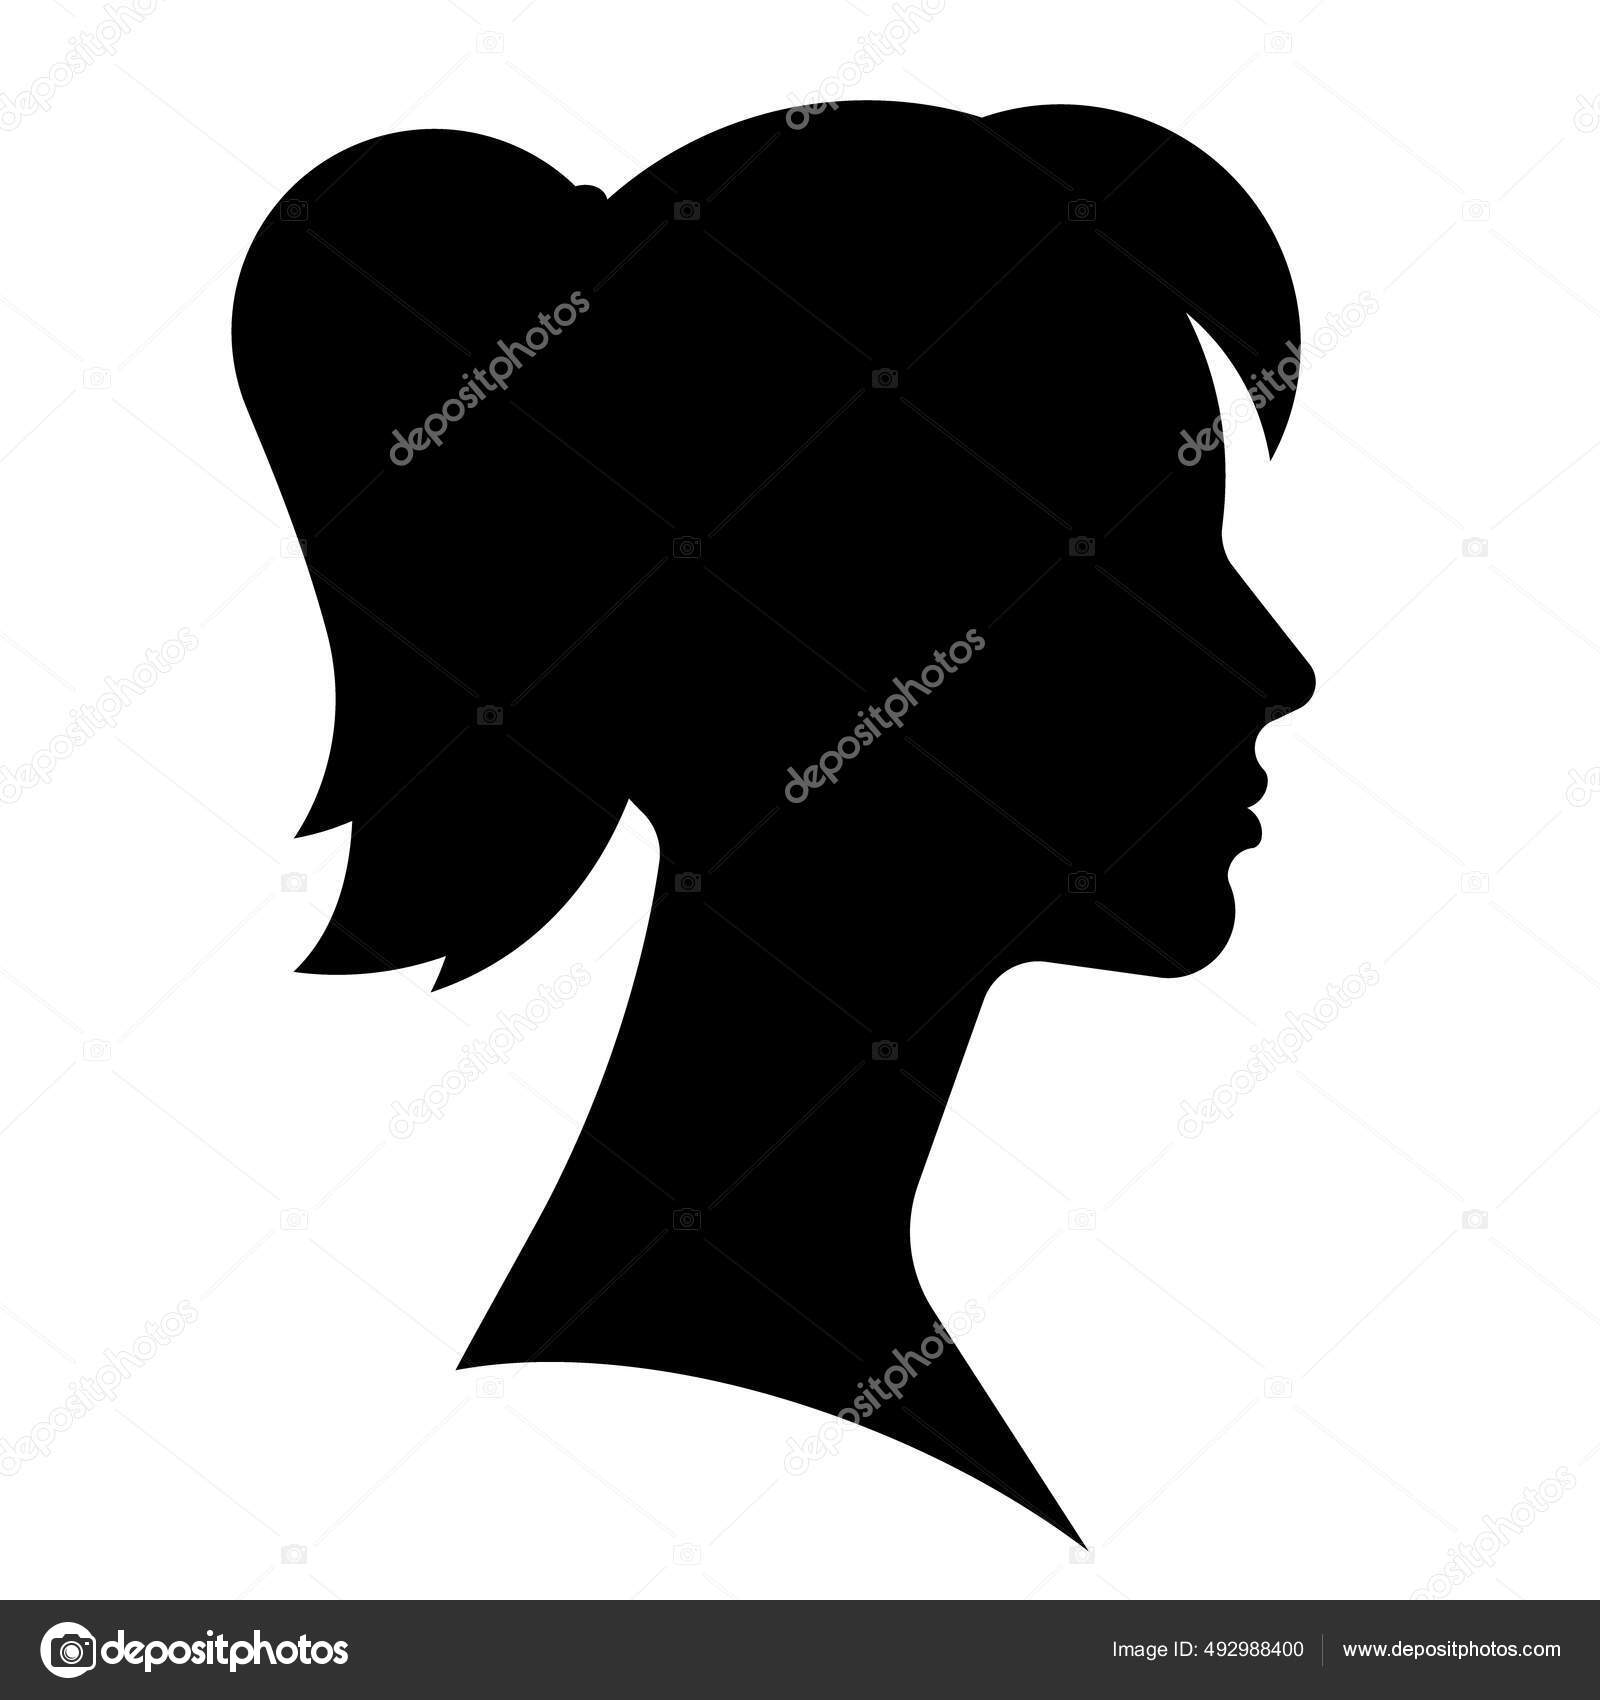 Young Girl face with ponytail hair from side view vector icon